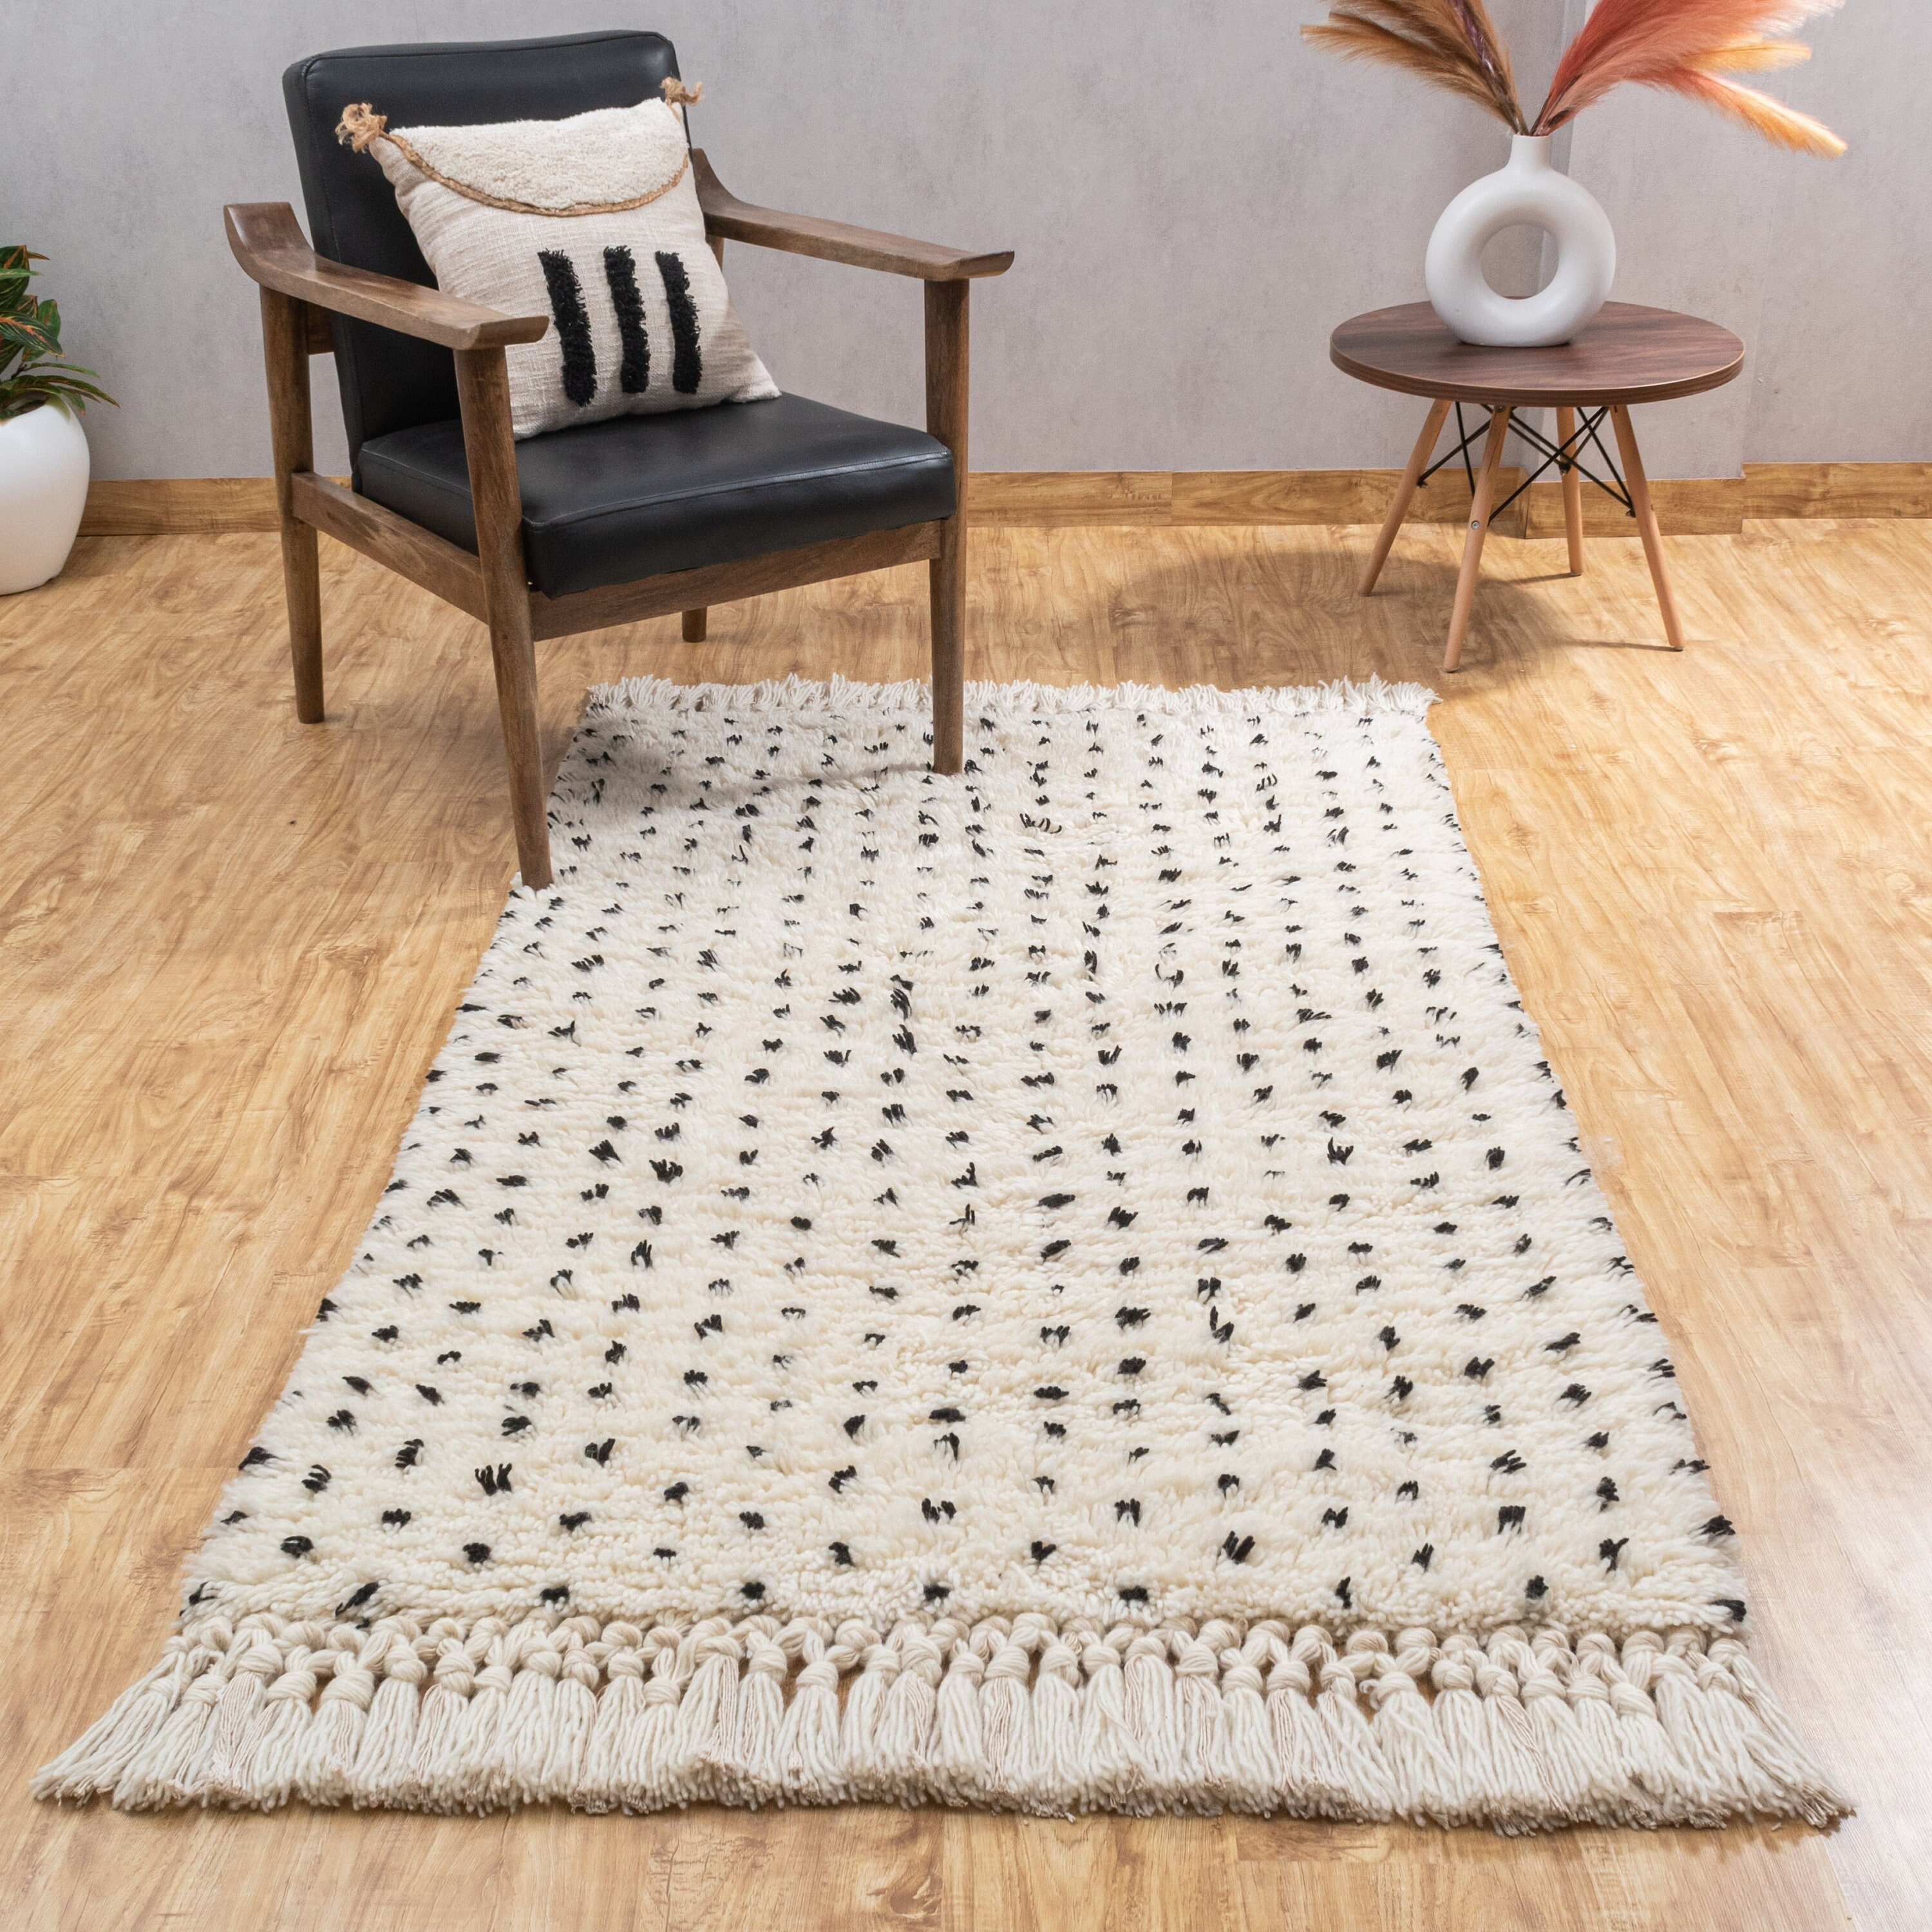  Heavyoff Shag Area Rug, Fluffy Fuzzy Soft Carpet Non-Slip High  Pile Rectangular Cozy Rug for Indoor Floor Living Room Grey Plaid, 2.6 ft x  6.6 ft : Home & Kitchen